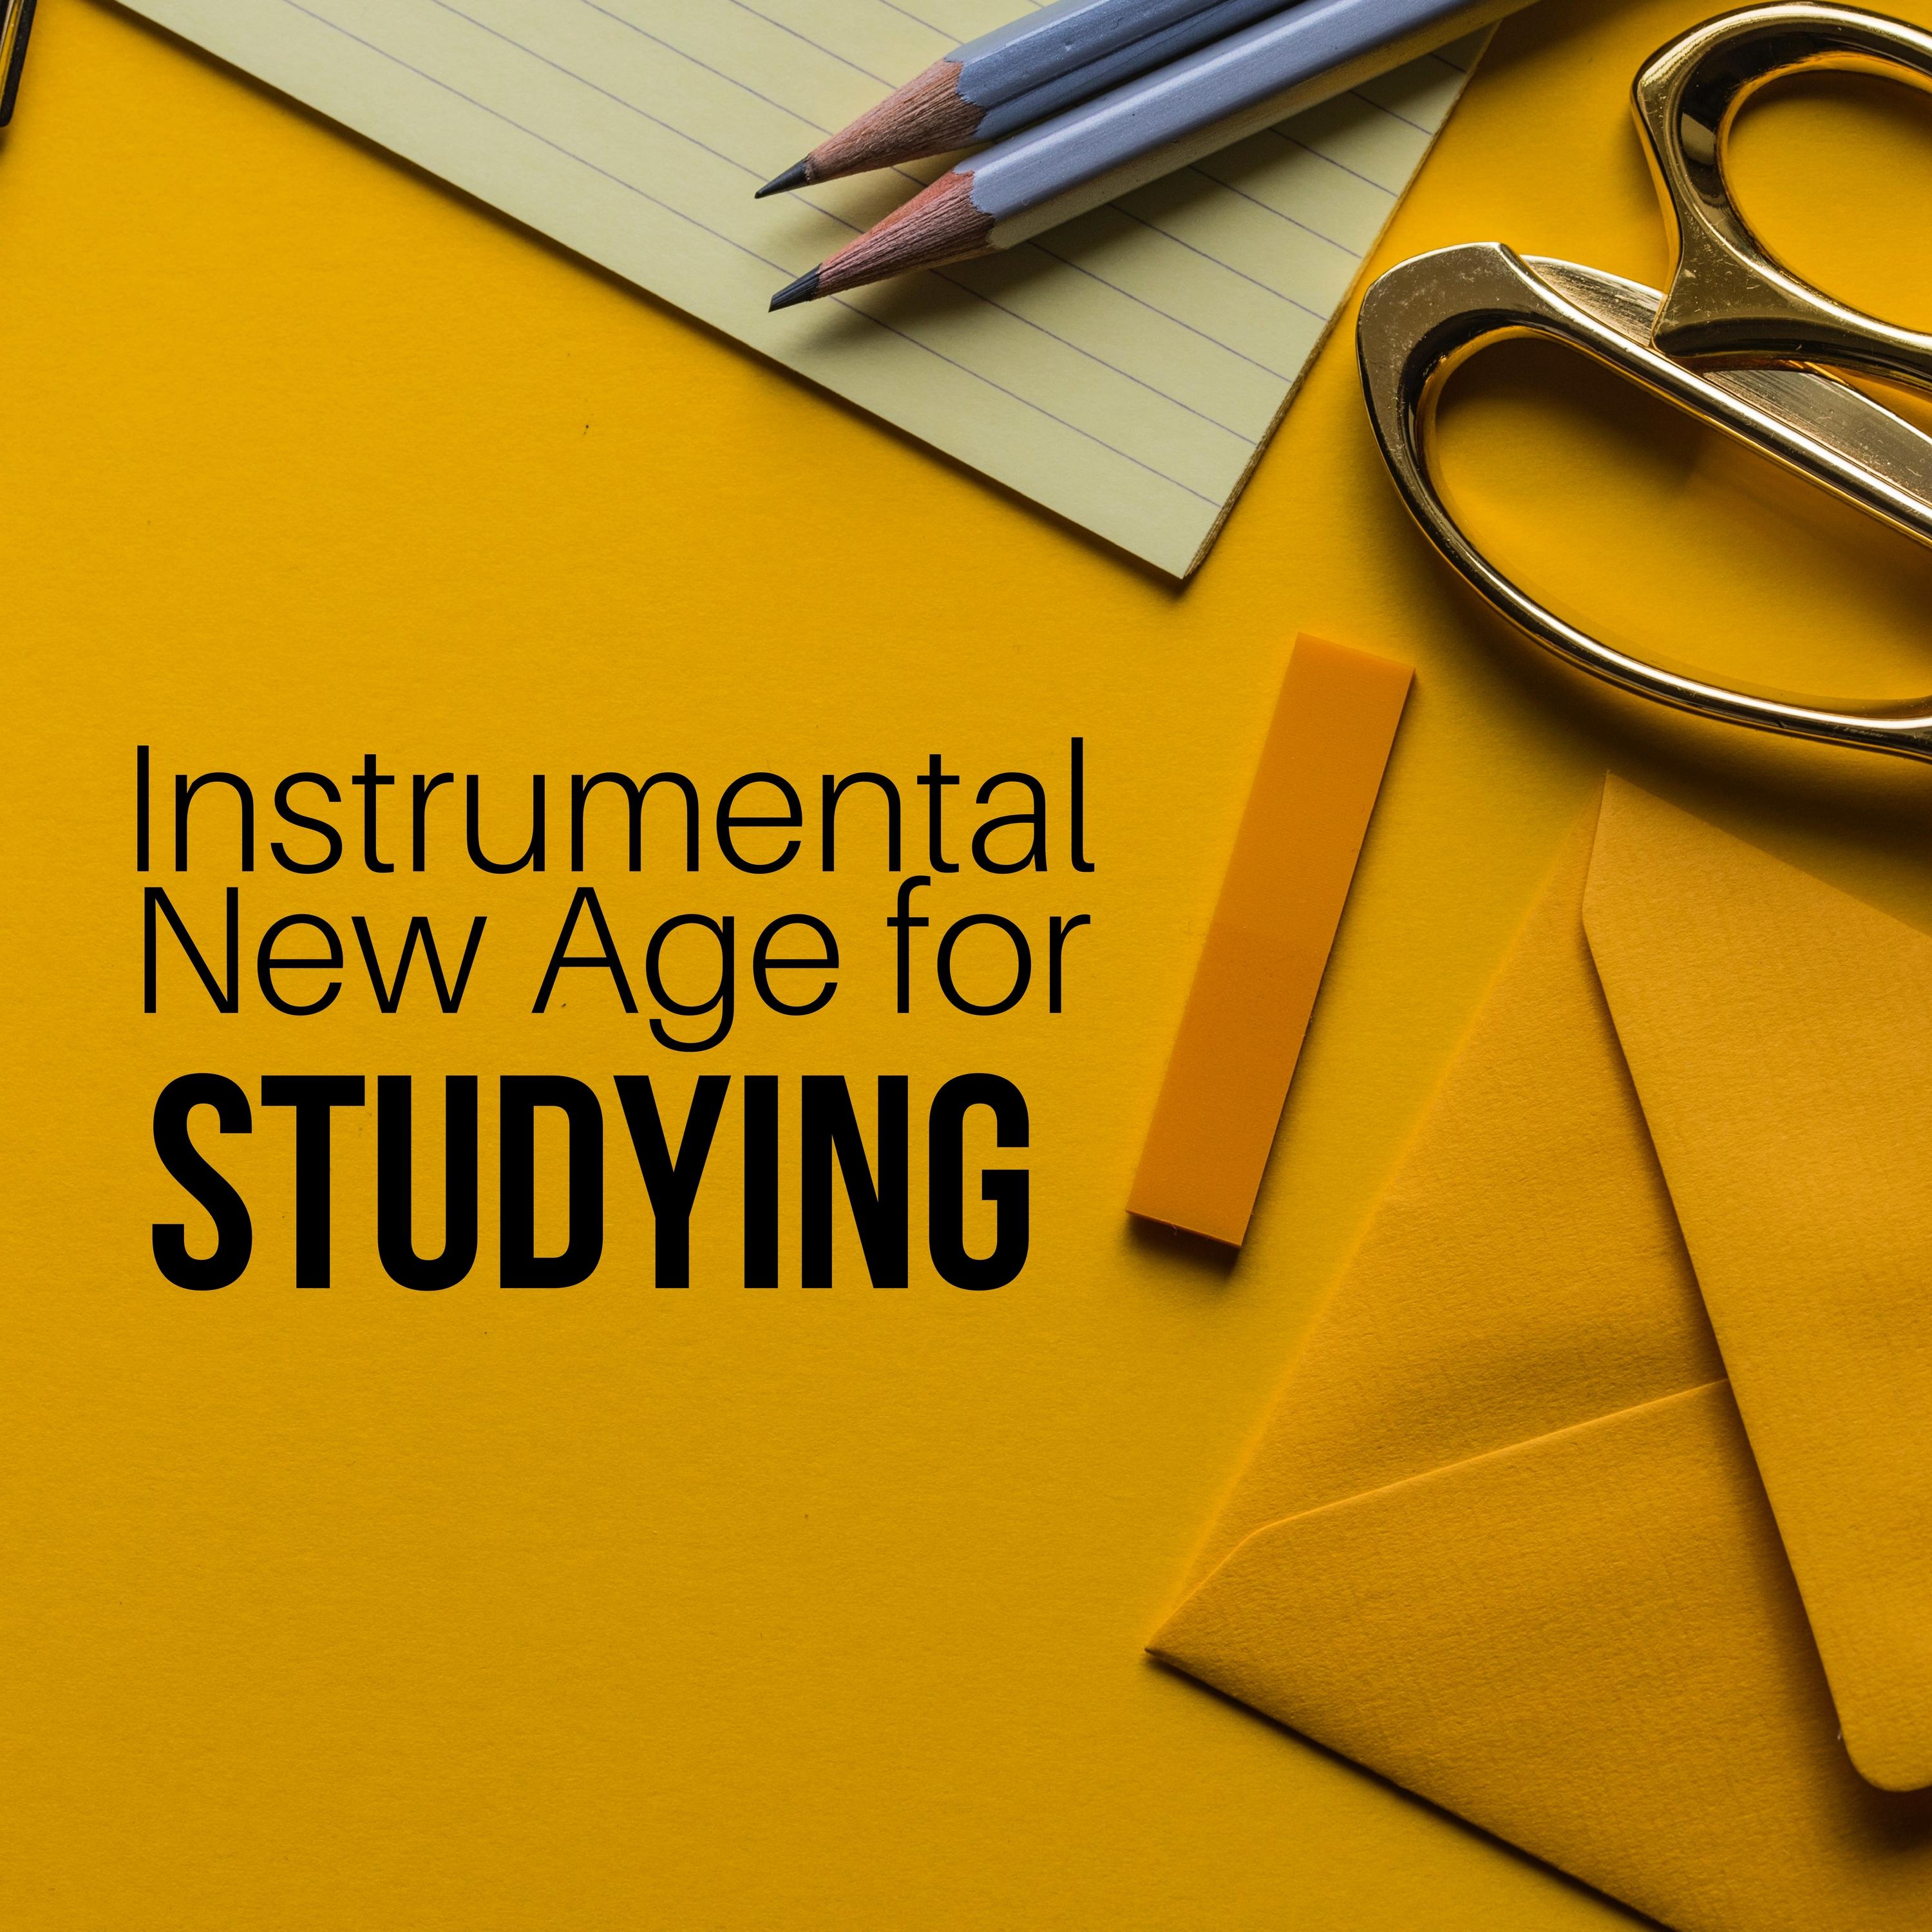 Instrumental New Age for Studying